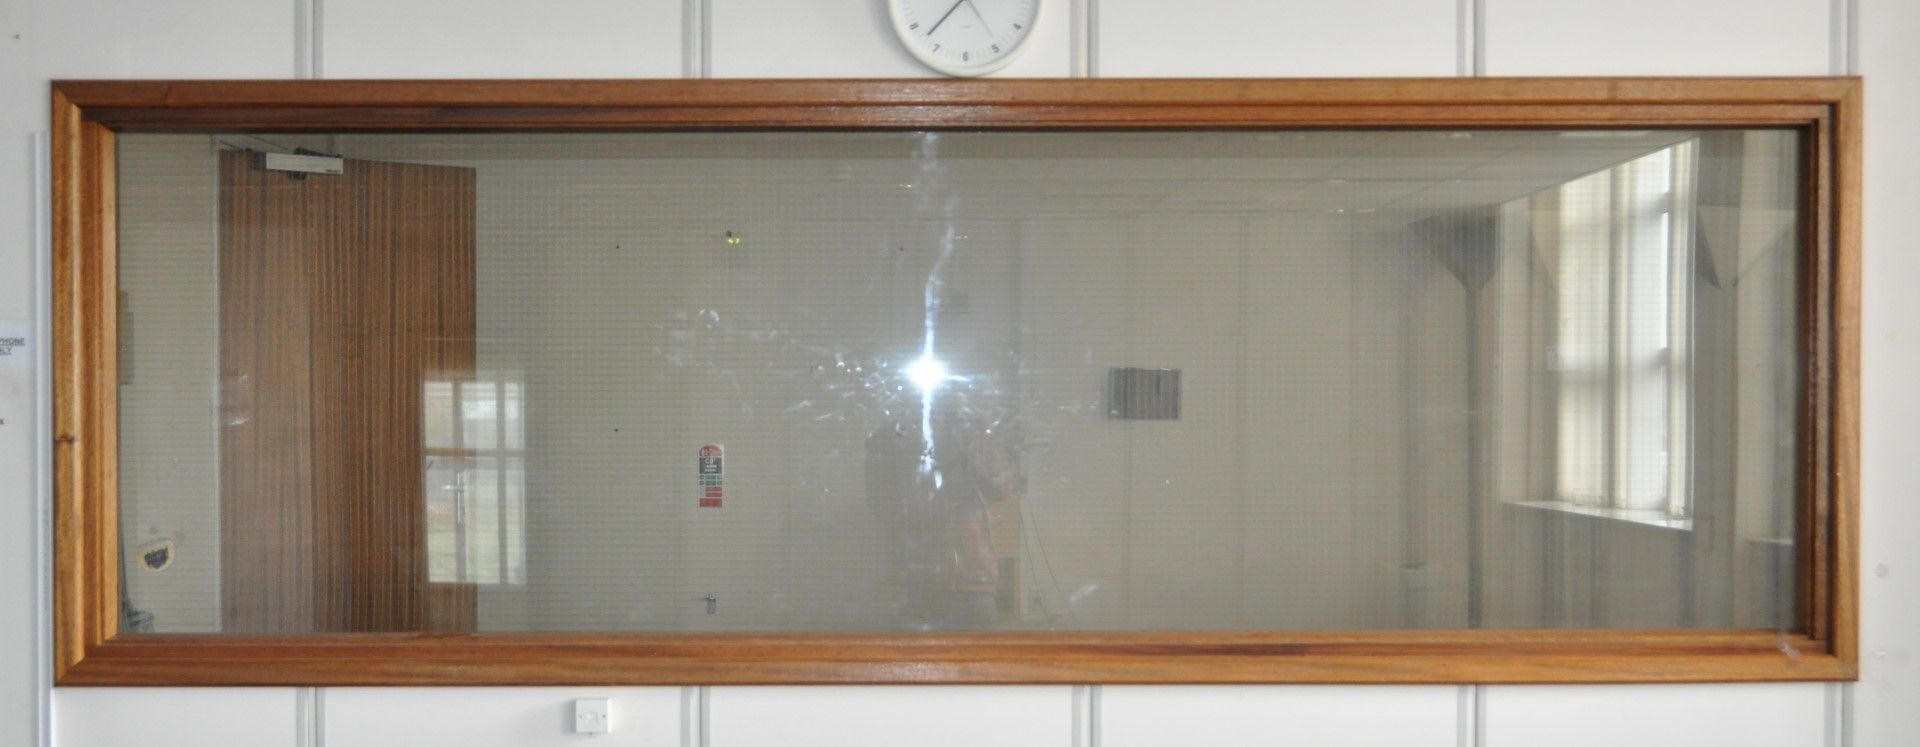 1 x Huge Vintage Oak Window Frame With Wire Mesh Security Glass - Size: 287 x 96 cms - Approx 9 Feet